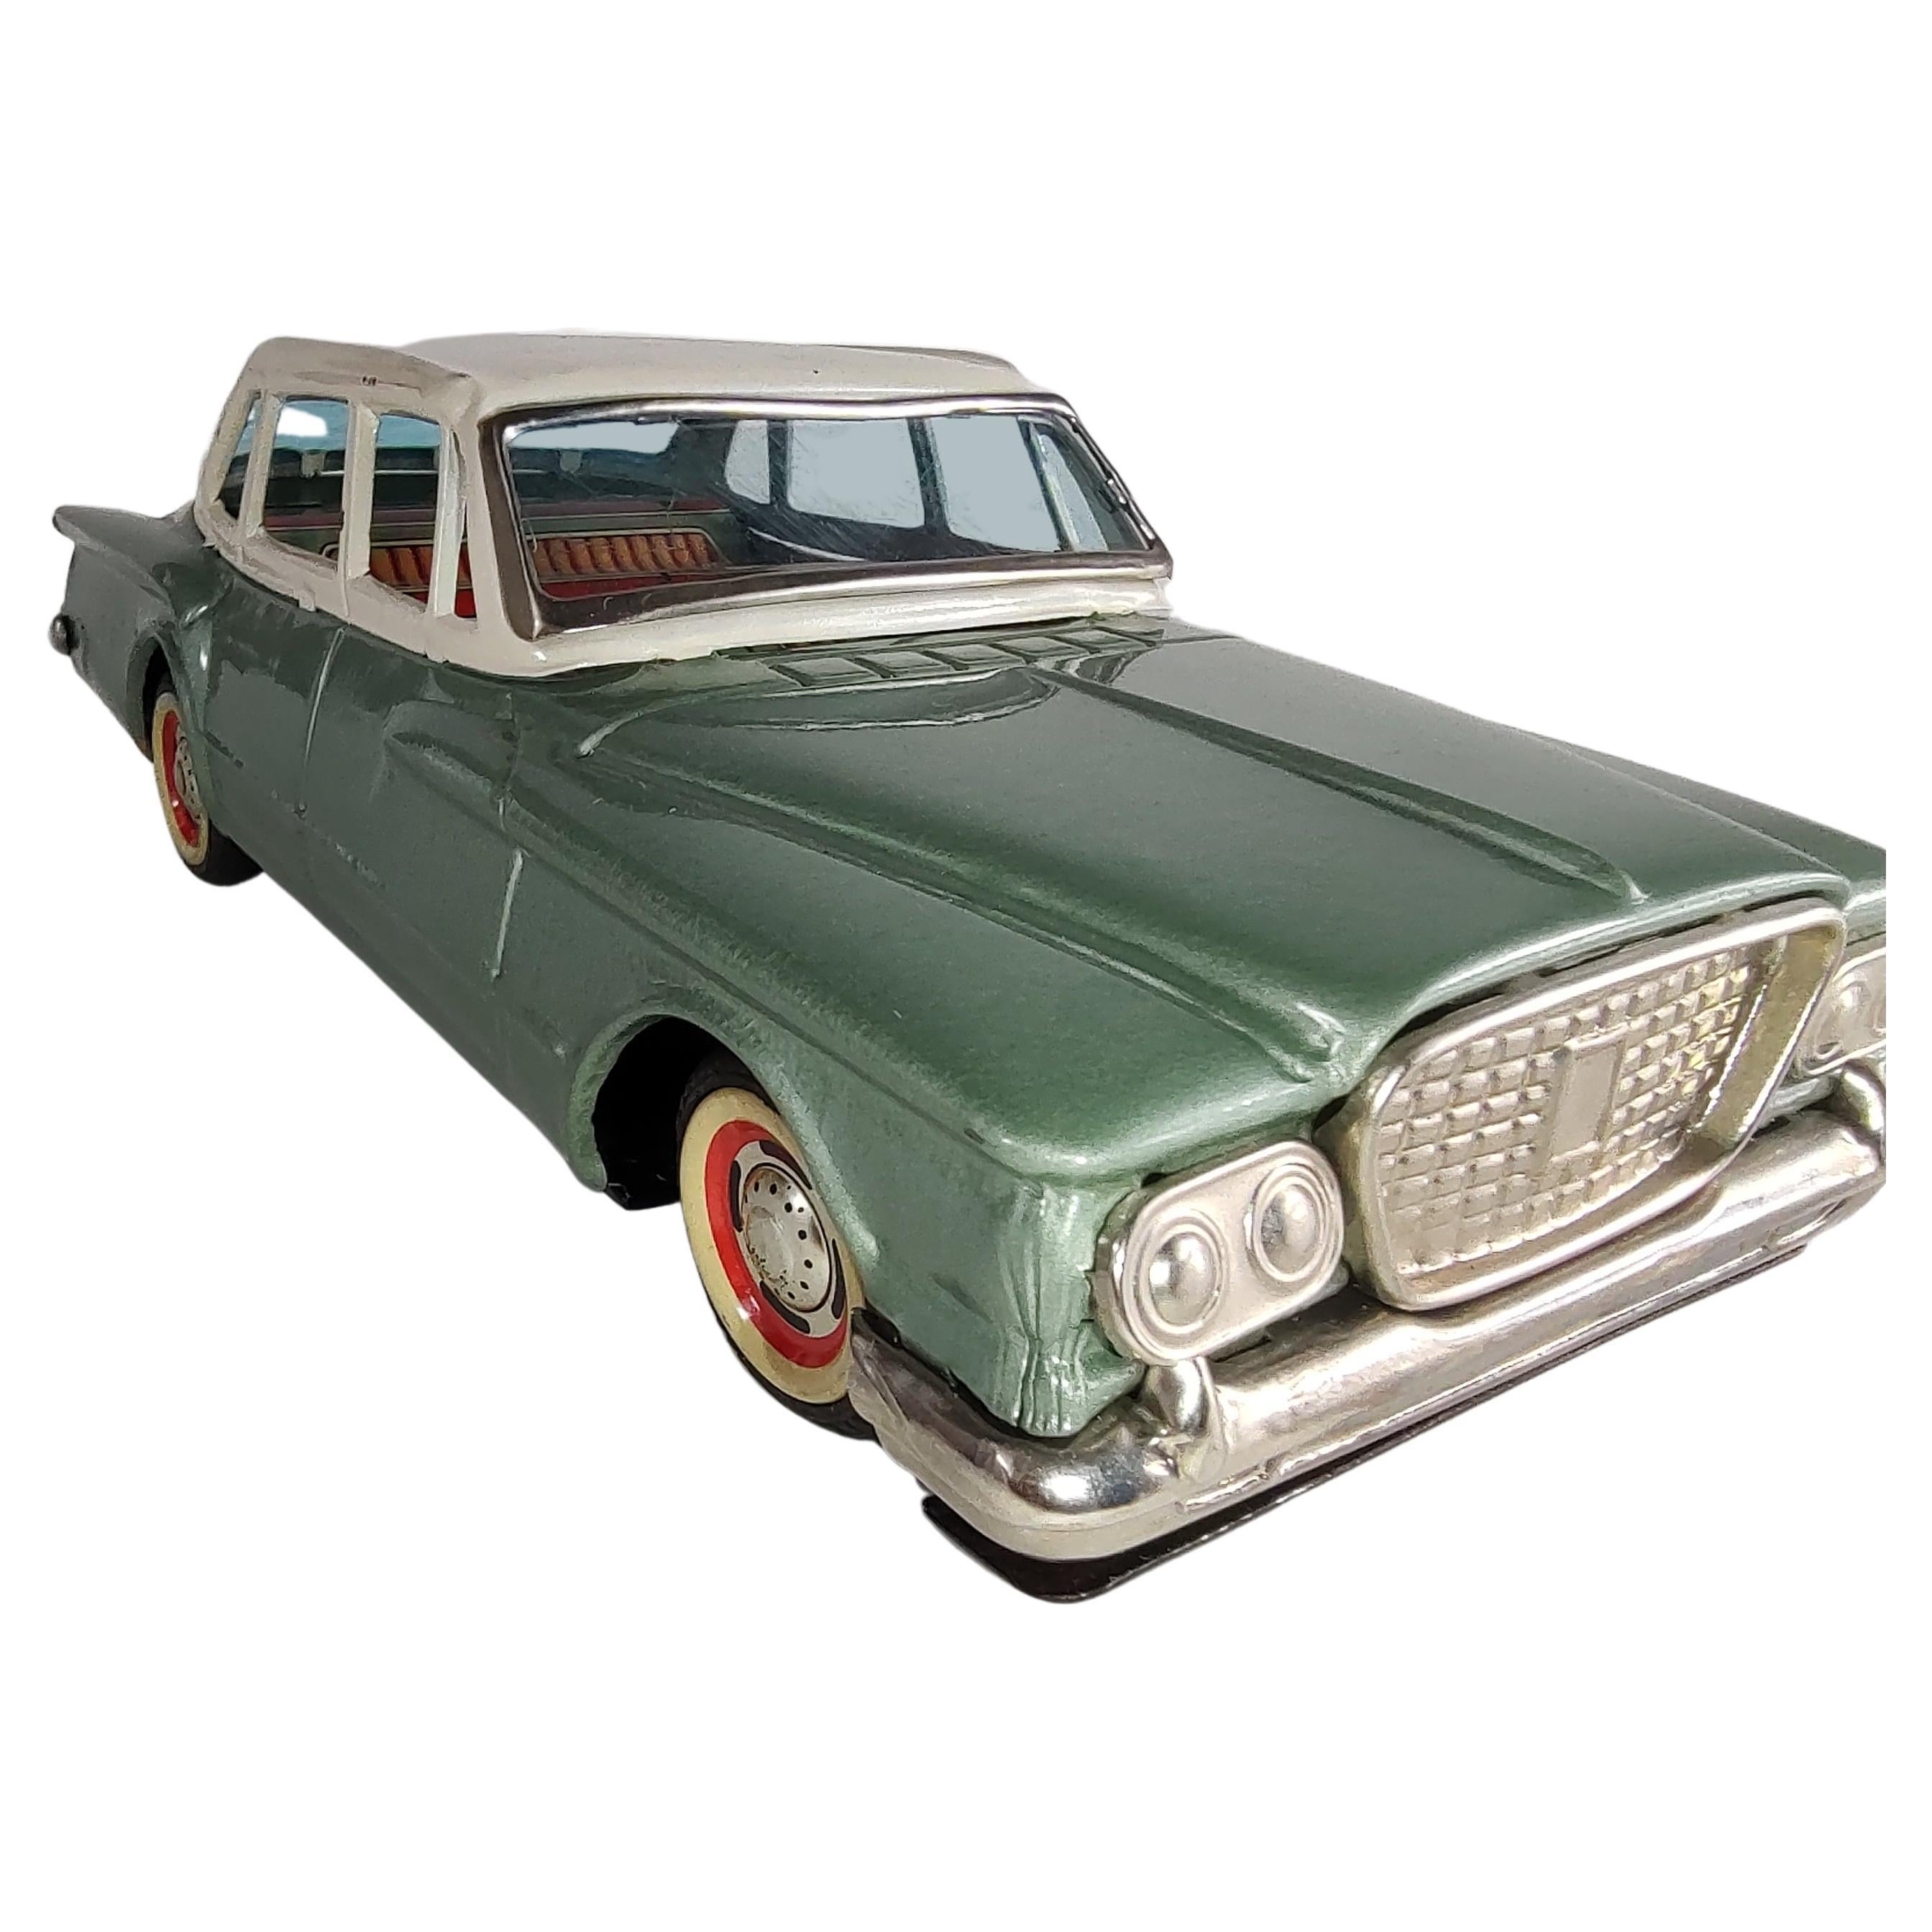 Midcentury Japanese Tin Litho Toy Plymouth Valiant, circa 1962 For Sale